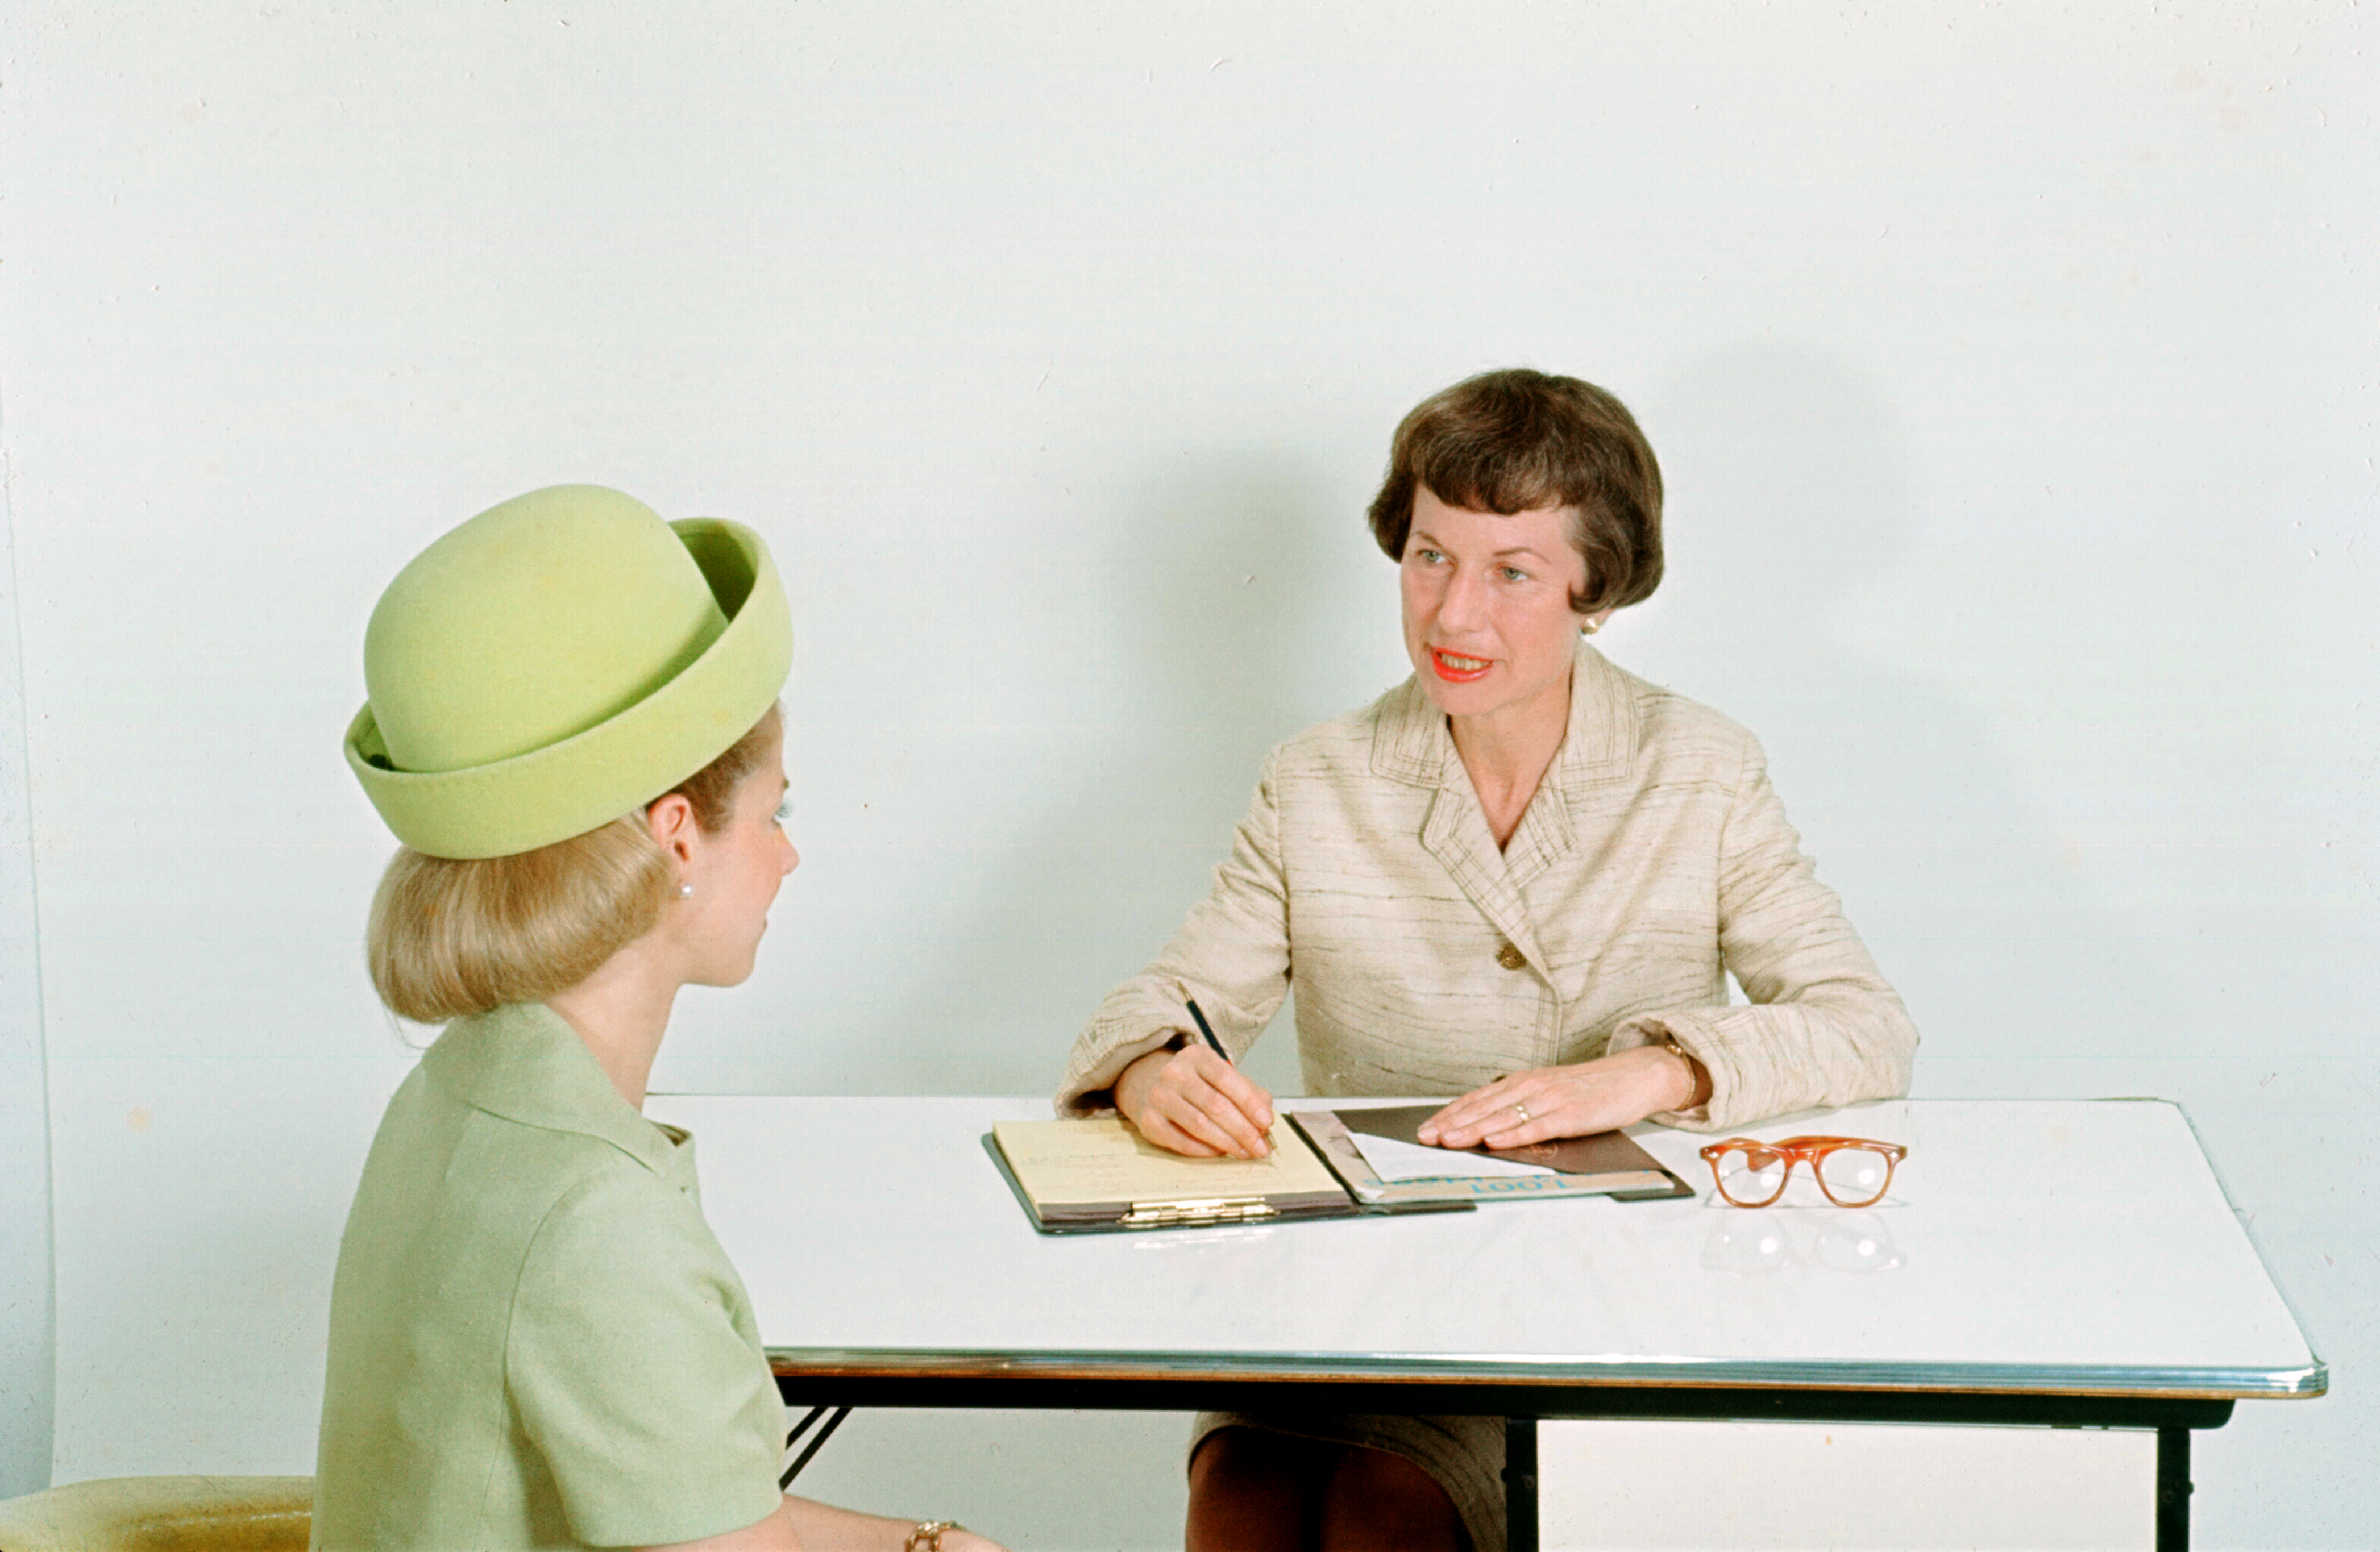 A woman sits behind a desk in professional attire, talking to a second woman and making notes in her notebook. The second woman is in the foreground and facing away from the camera and looking at the woman behind the desk.